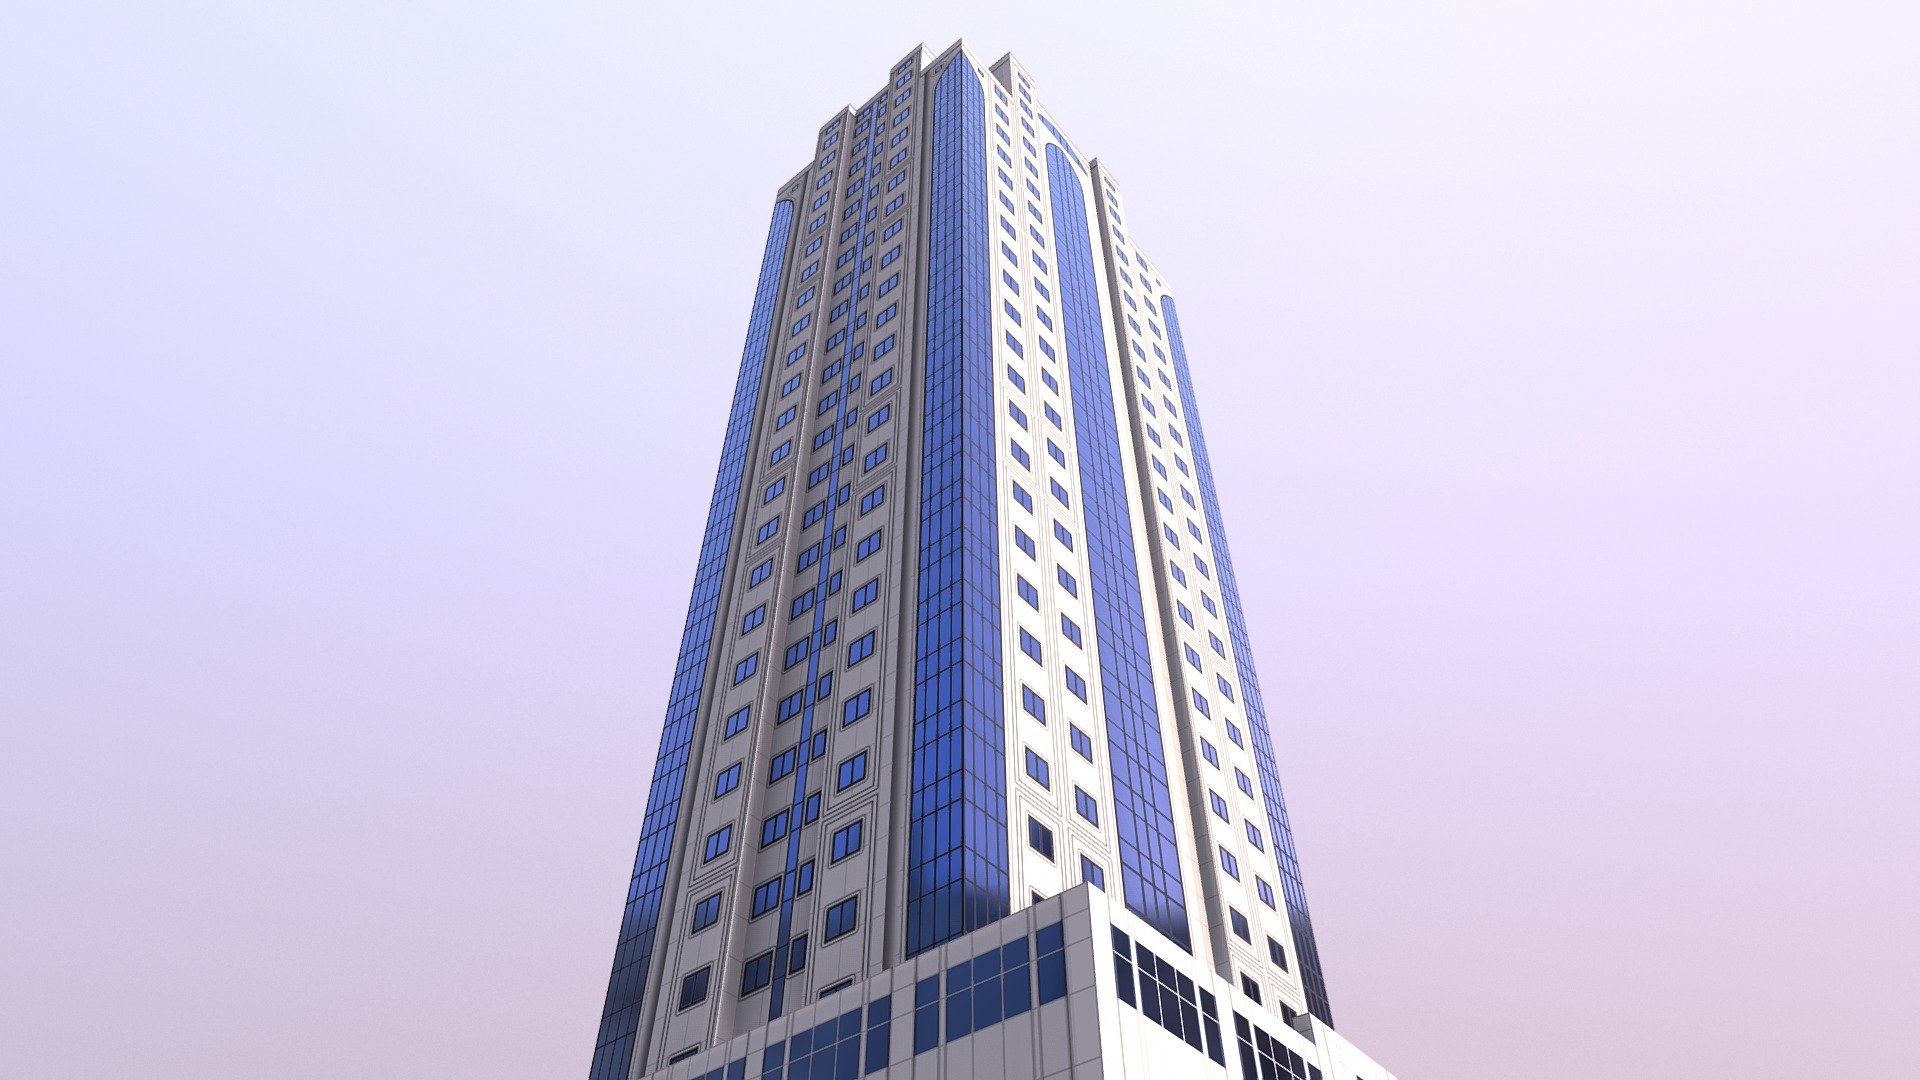 You can buy this 3D Model here - -link removed-  Low-Poly 3D Model of the skyscrapper #3 which is the part of the buildings complex: the Grozny-City Towers. It is a is a five-star skyscraper hotel and business centre complex located near Grozny Central Mosque in Grozny, Chechnya. Tower #3 is the corner one 3d model